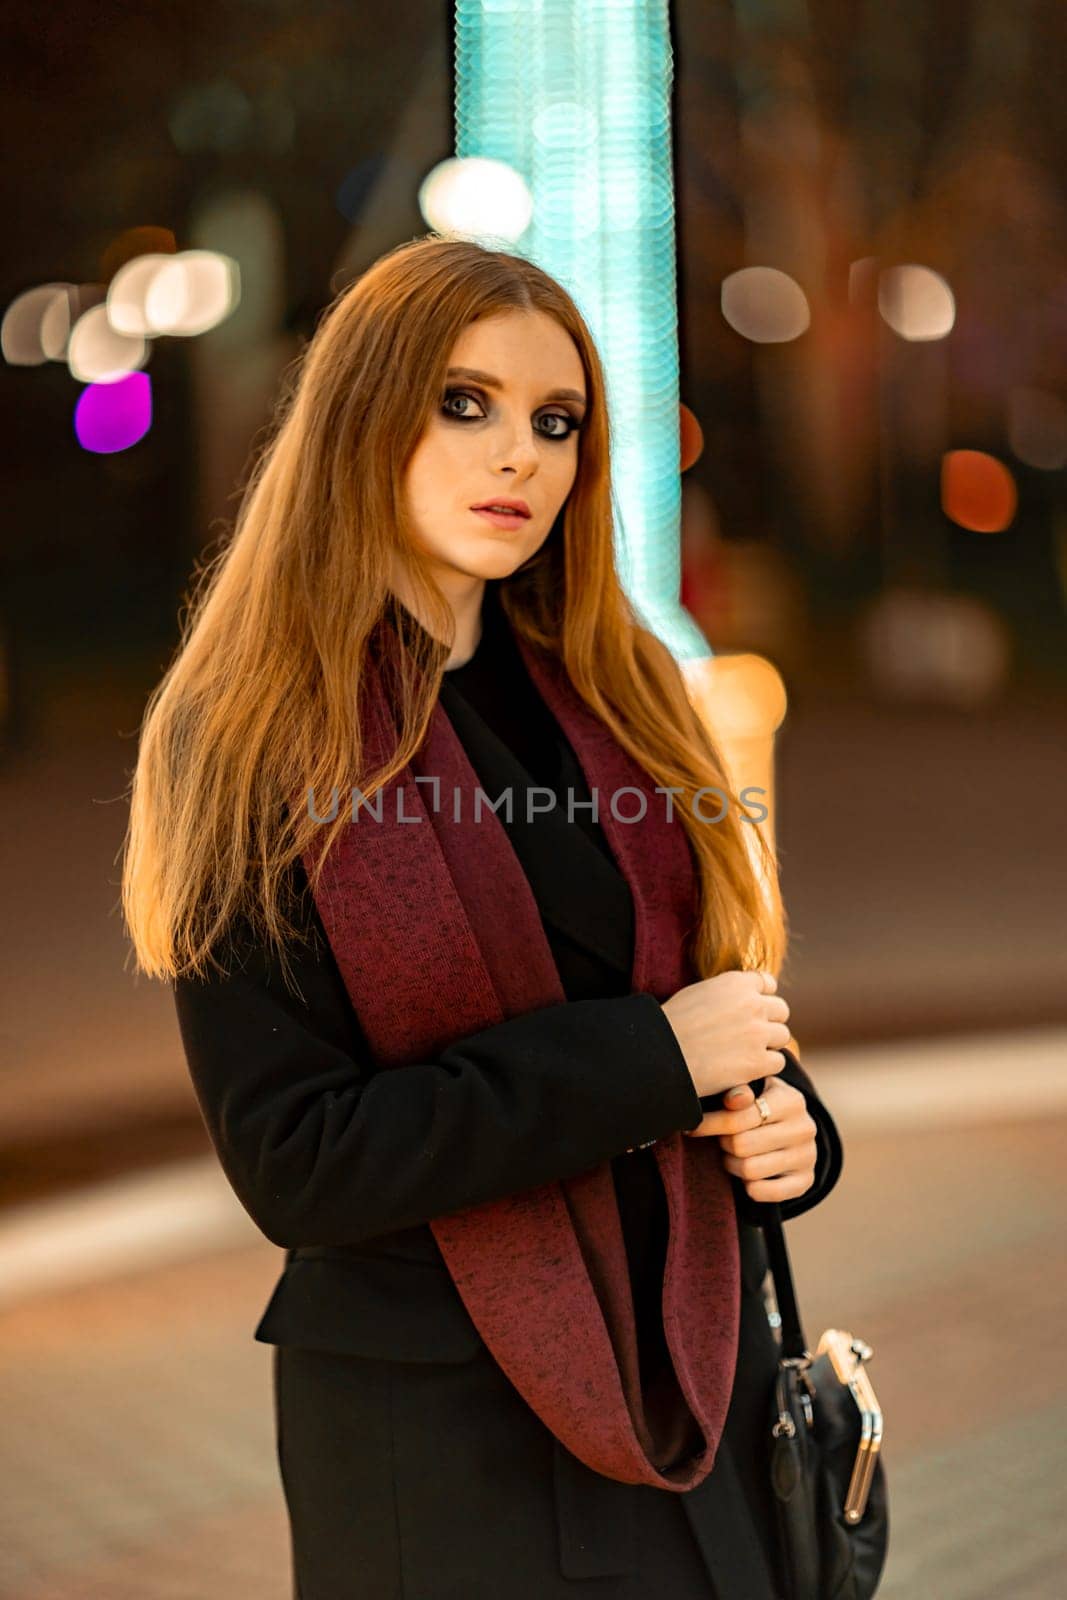 Christmas mood. Woman with long hair in sity decorated for Christmas. She is dressed in a black coat